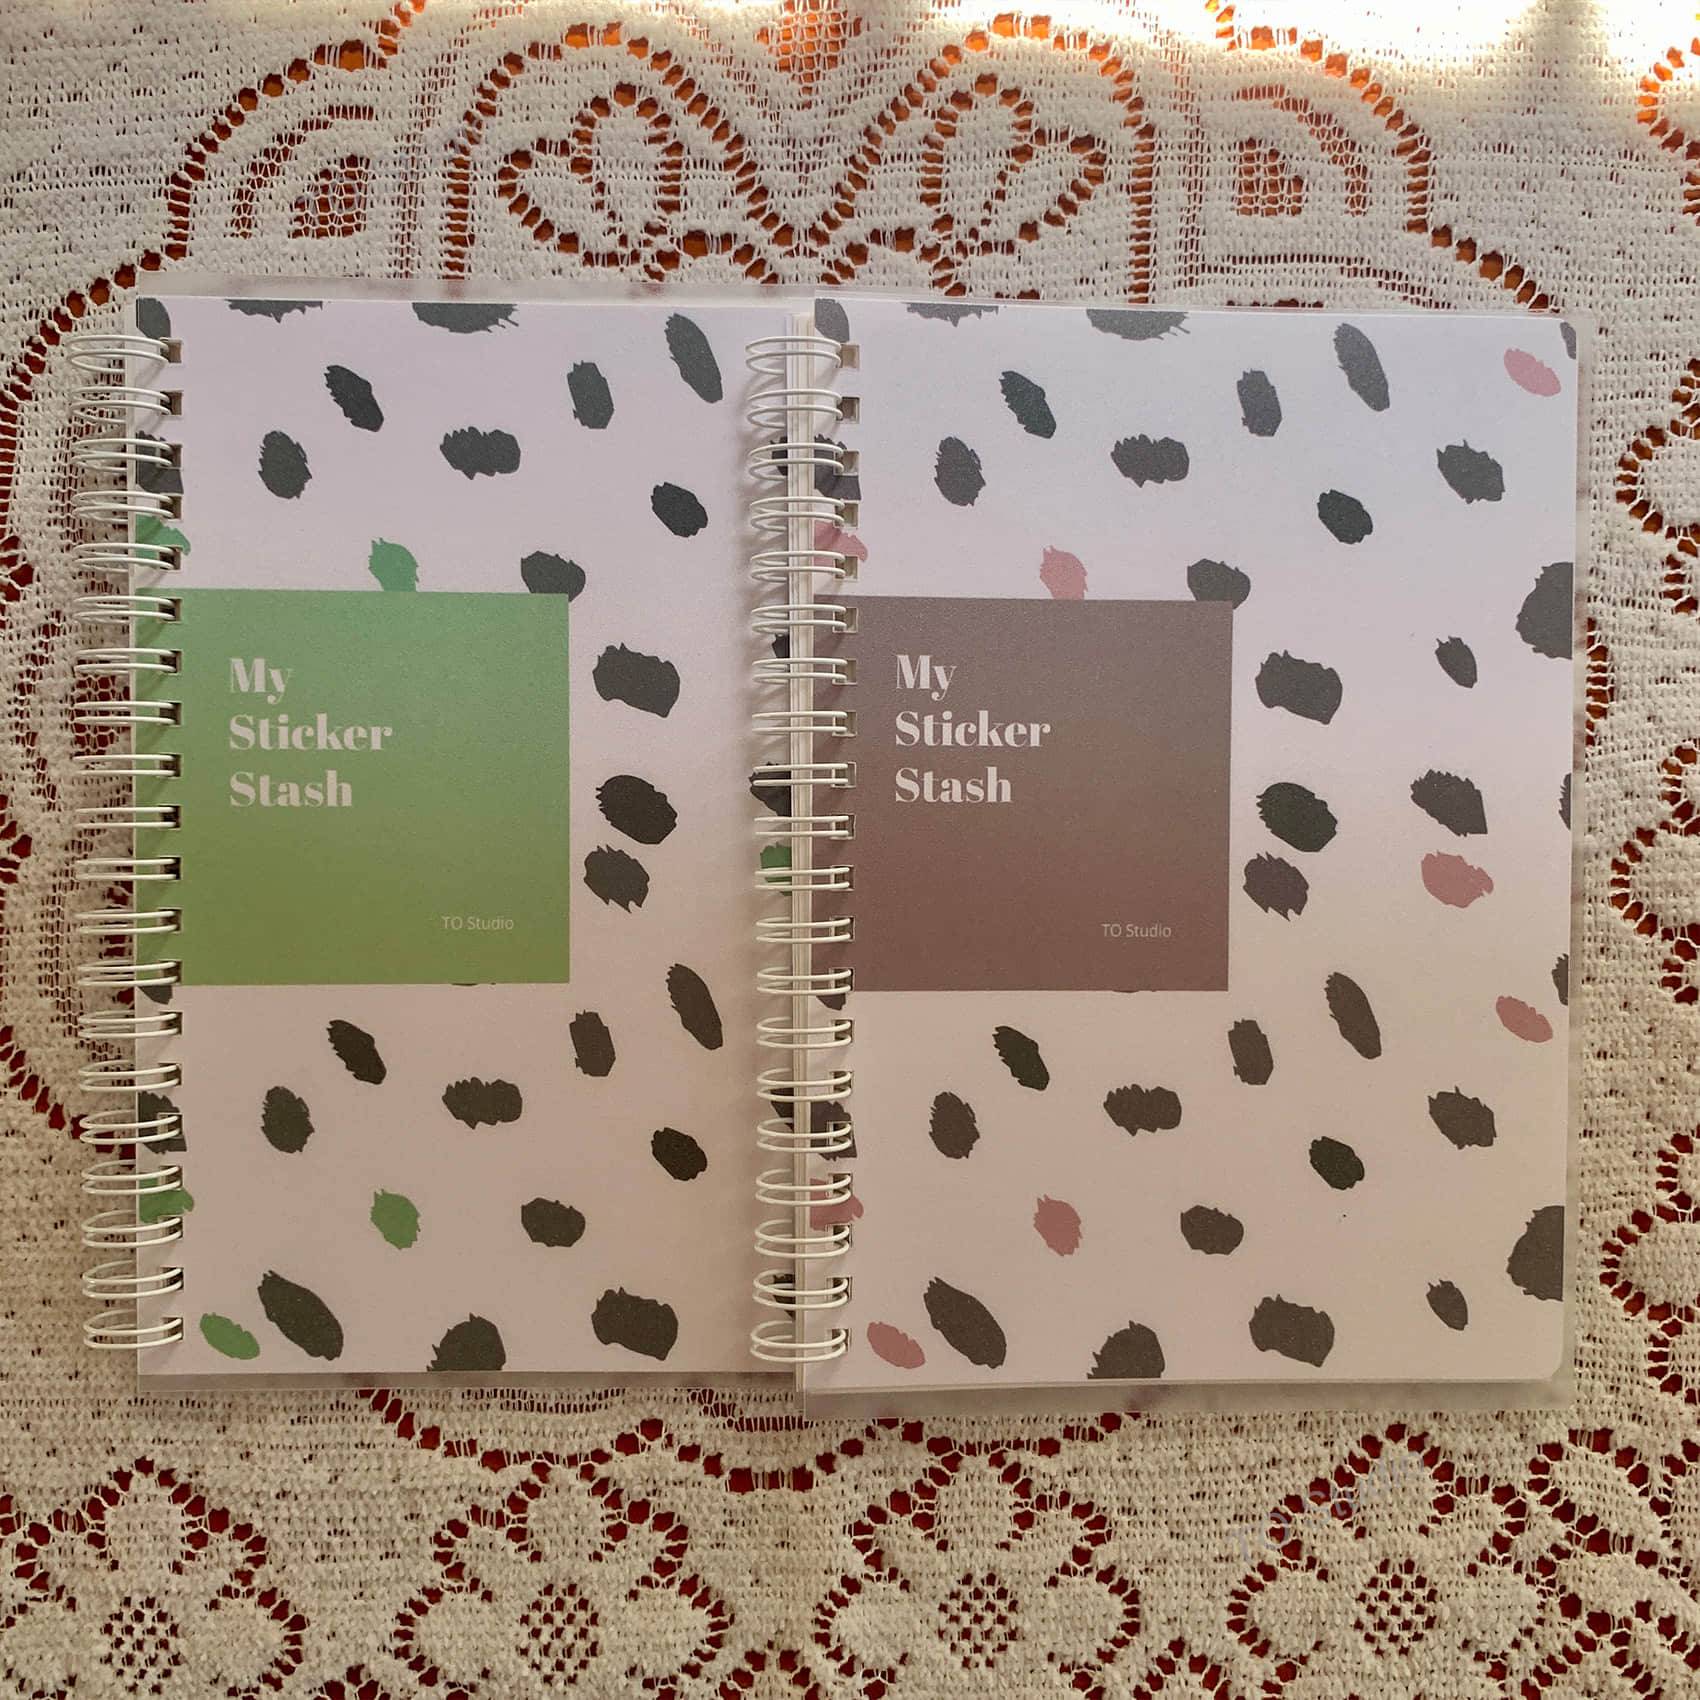 Colour leopard print Reusable Sticker Book A5 size, 50 double-sided pages-FUU Studio